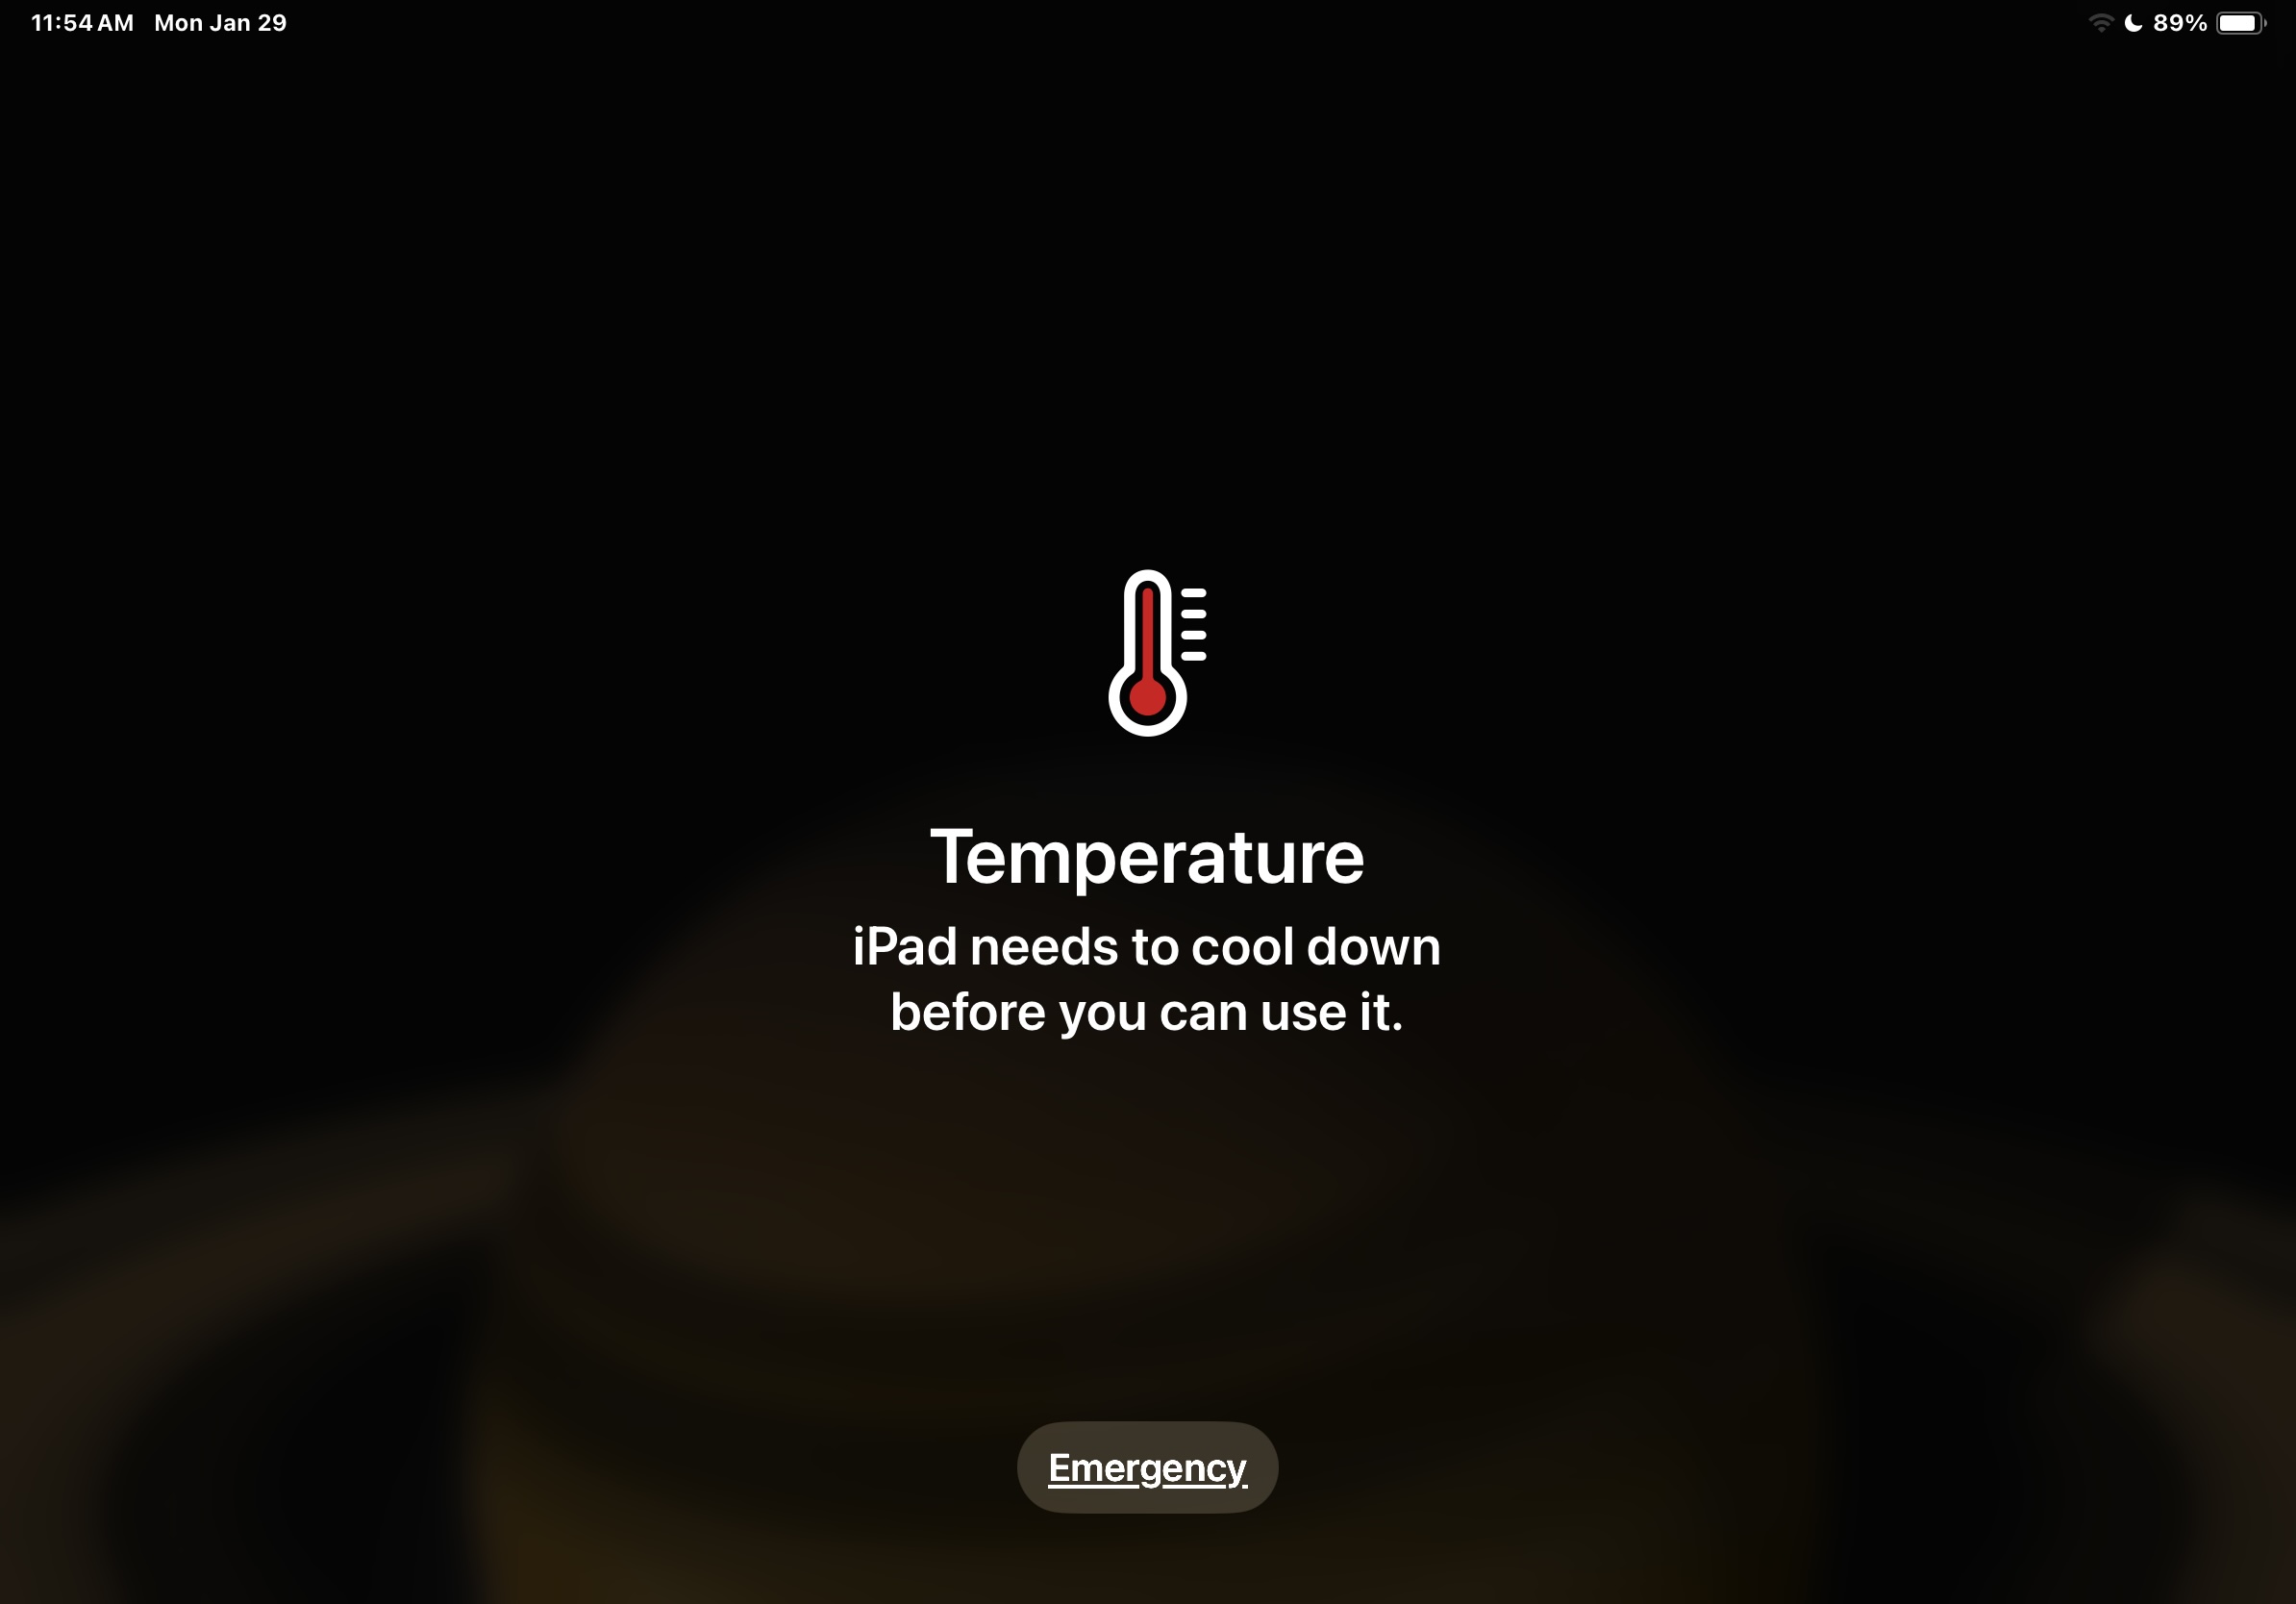 iPad needs to cool down before you can use it